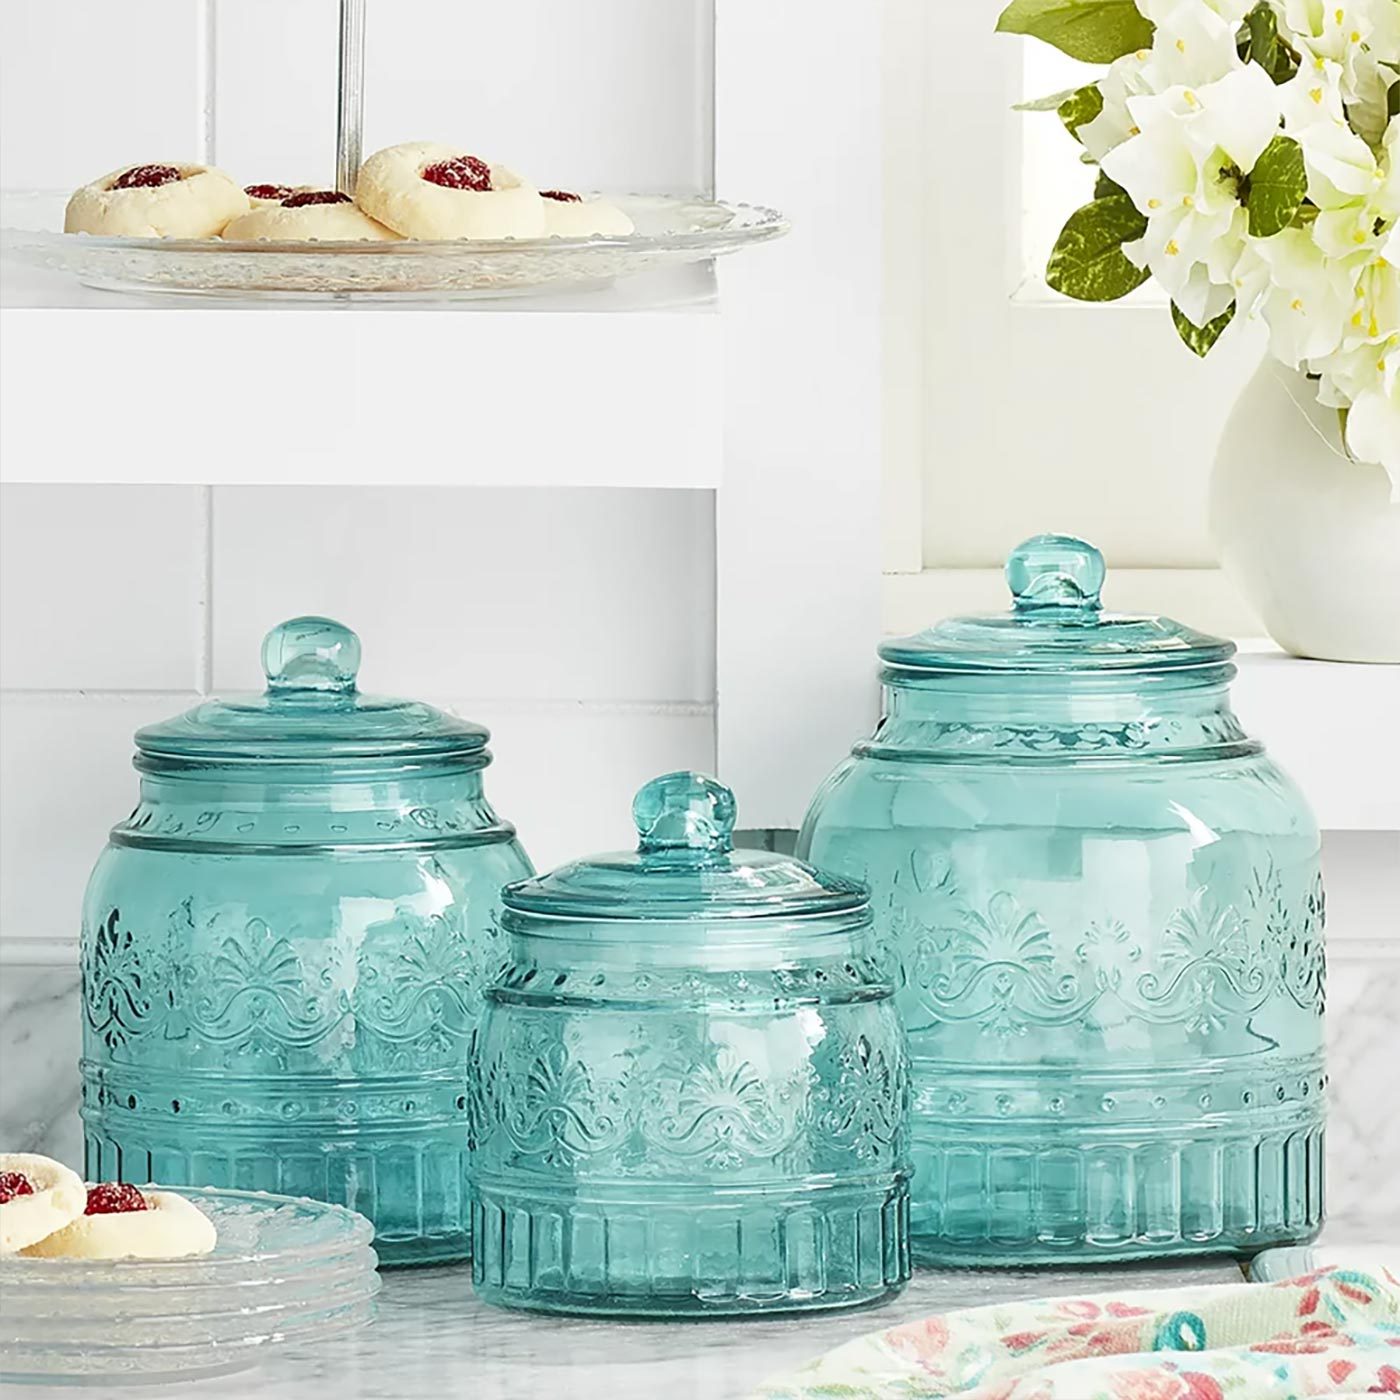 https://www.tasteofhome.com/wp-content/uploads/2023/03/16-Pretty-Products-from-The-Pioneer-Woman-That-Double-as-Easter-Decor_FT_via-walmart.com_.jpg